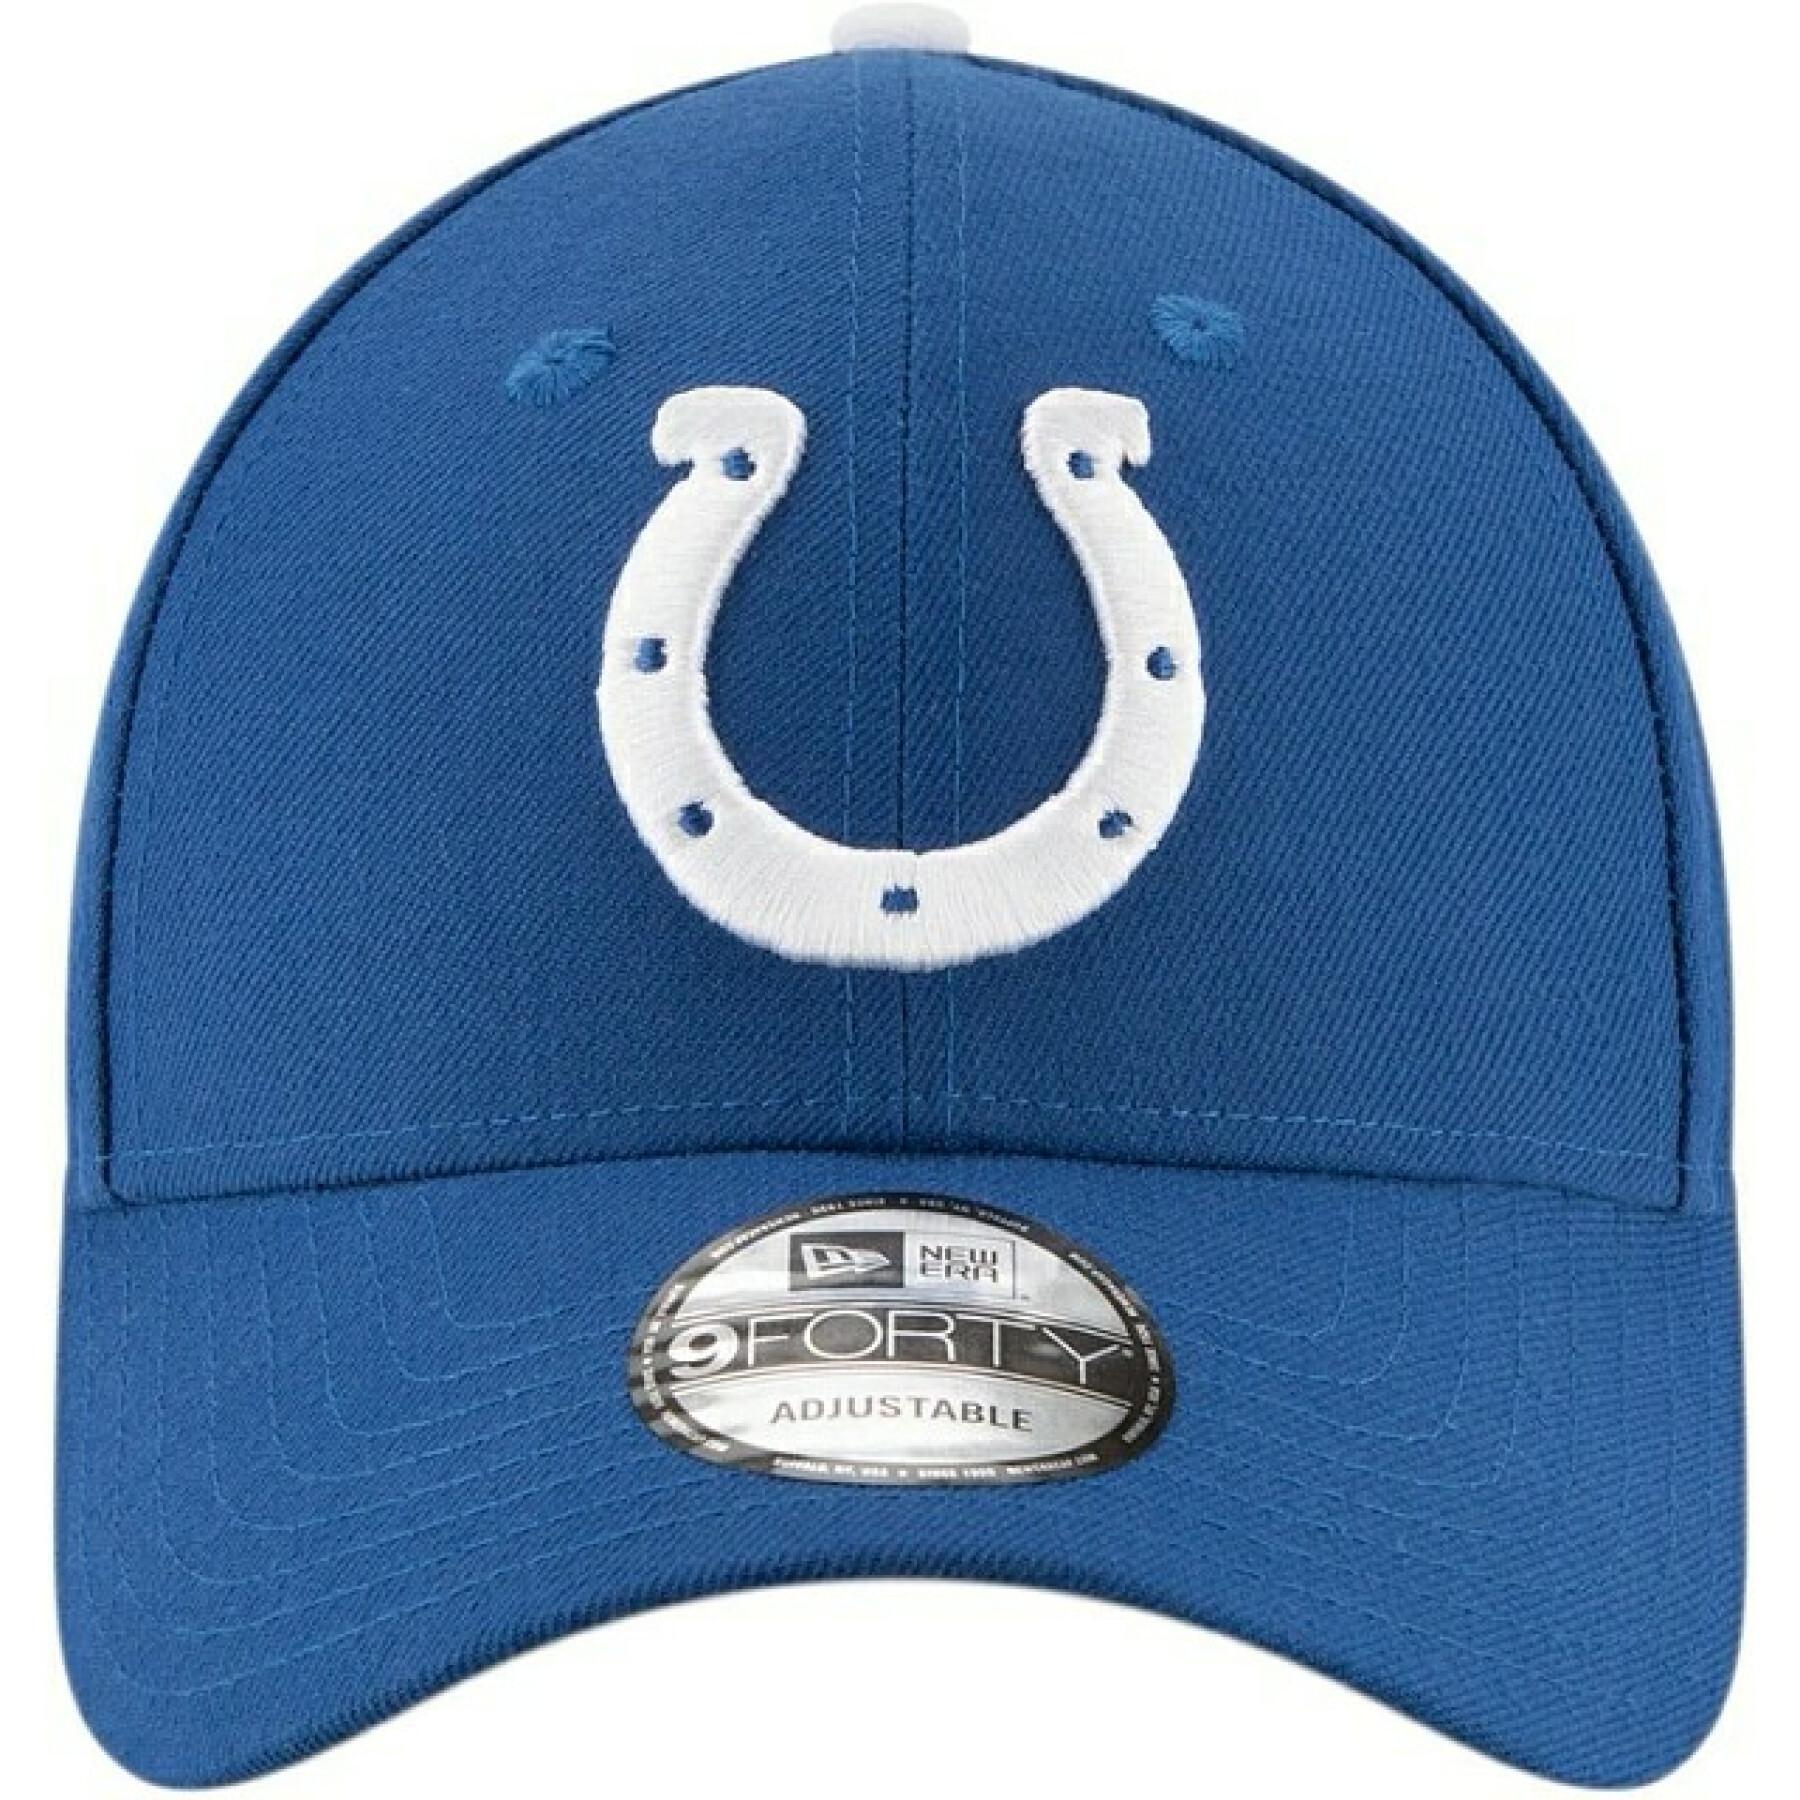 Kappe Indianapolis Colts NFL 2021/22